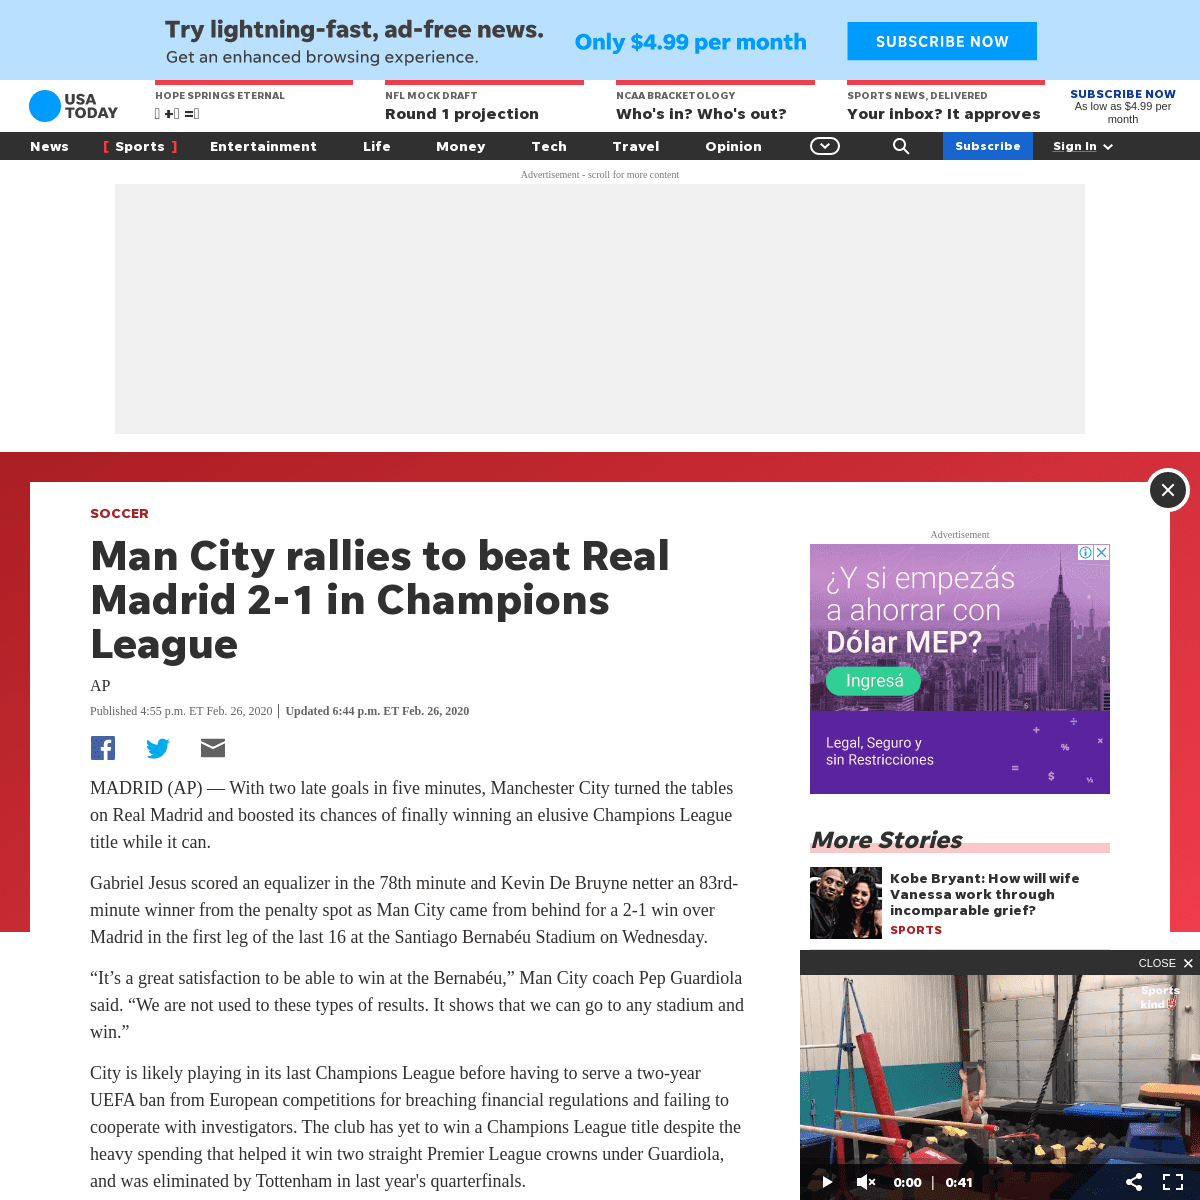 A complete backup of www.usatoday.com/story/sports/soccer/2020/02/26/man-city-rallies-to-beat-real-madrid-2-1-in-champions-leagu